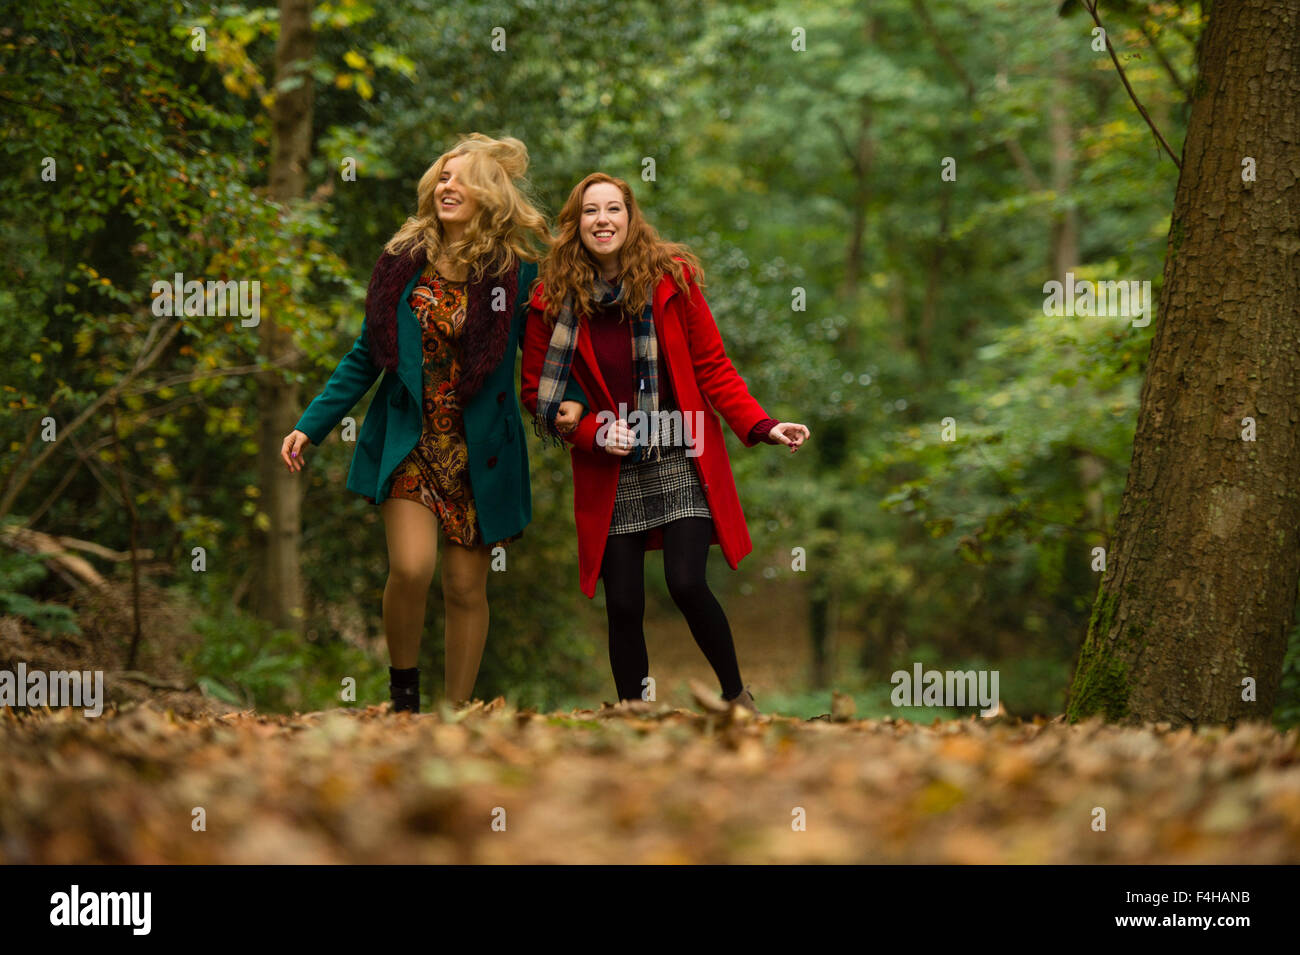 Aberystwyth Wales UK., Sunday 18 October 2015  Two happy smiling laughing young women (Iulia Nicola and Rhian Daniell) enjoying a Sunday afternoon stroll along a footpath in the autumnal woodlands at Penglais Park,  Aberystwyth, Wales   Photo Credit:  Keith Morris / Alamy Live News Stock Photo